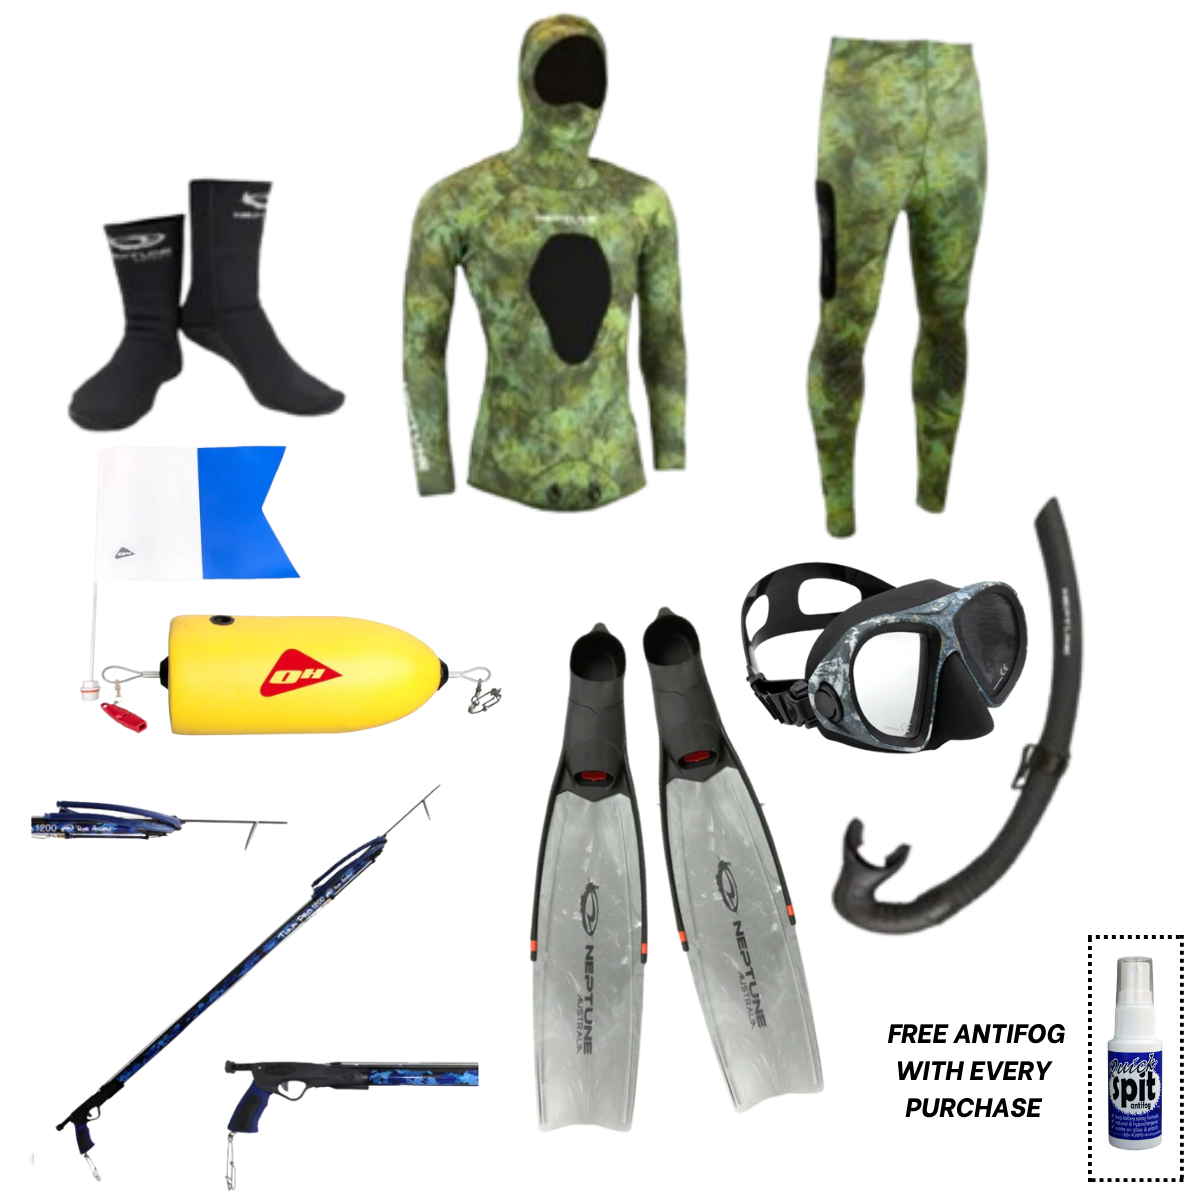 Neptune Warlord Complete Spearfishing Package